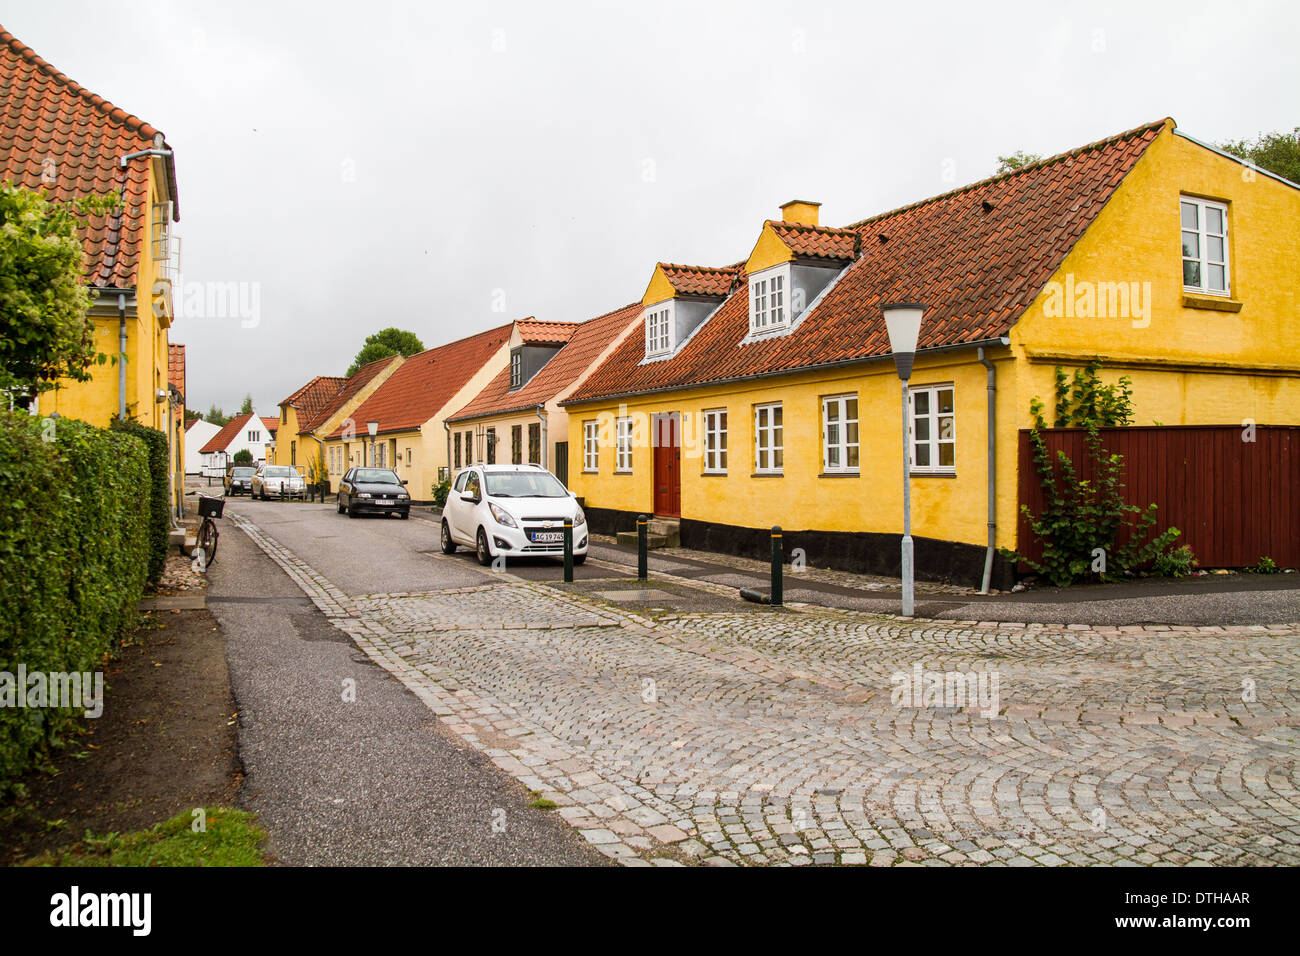 A village street in the historic rural town of Maribo denmark Stock Photo